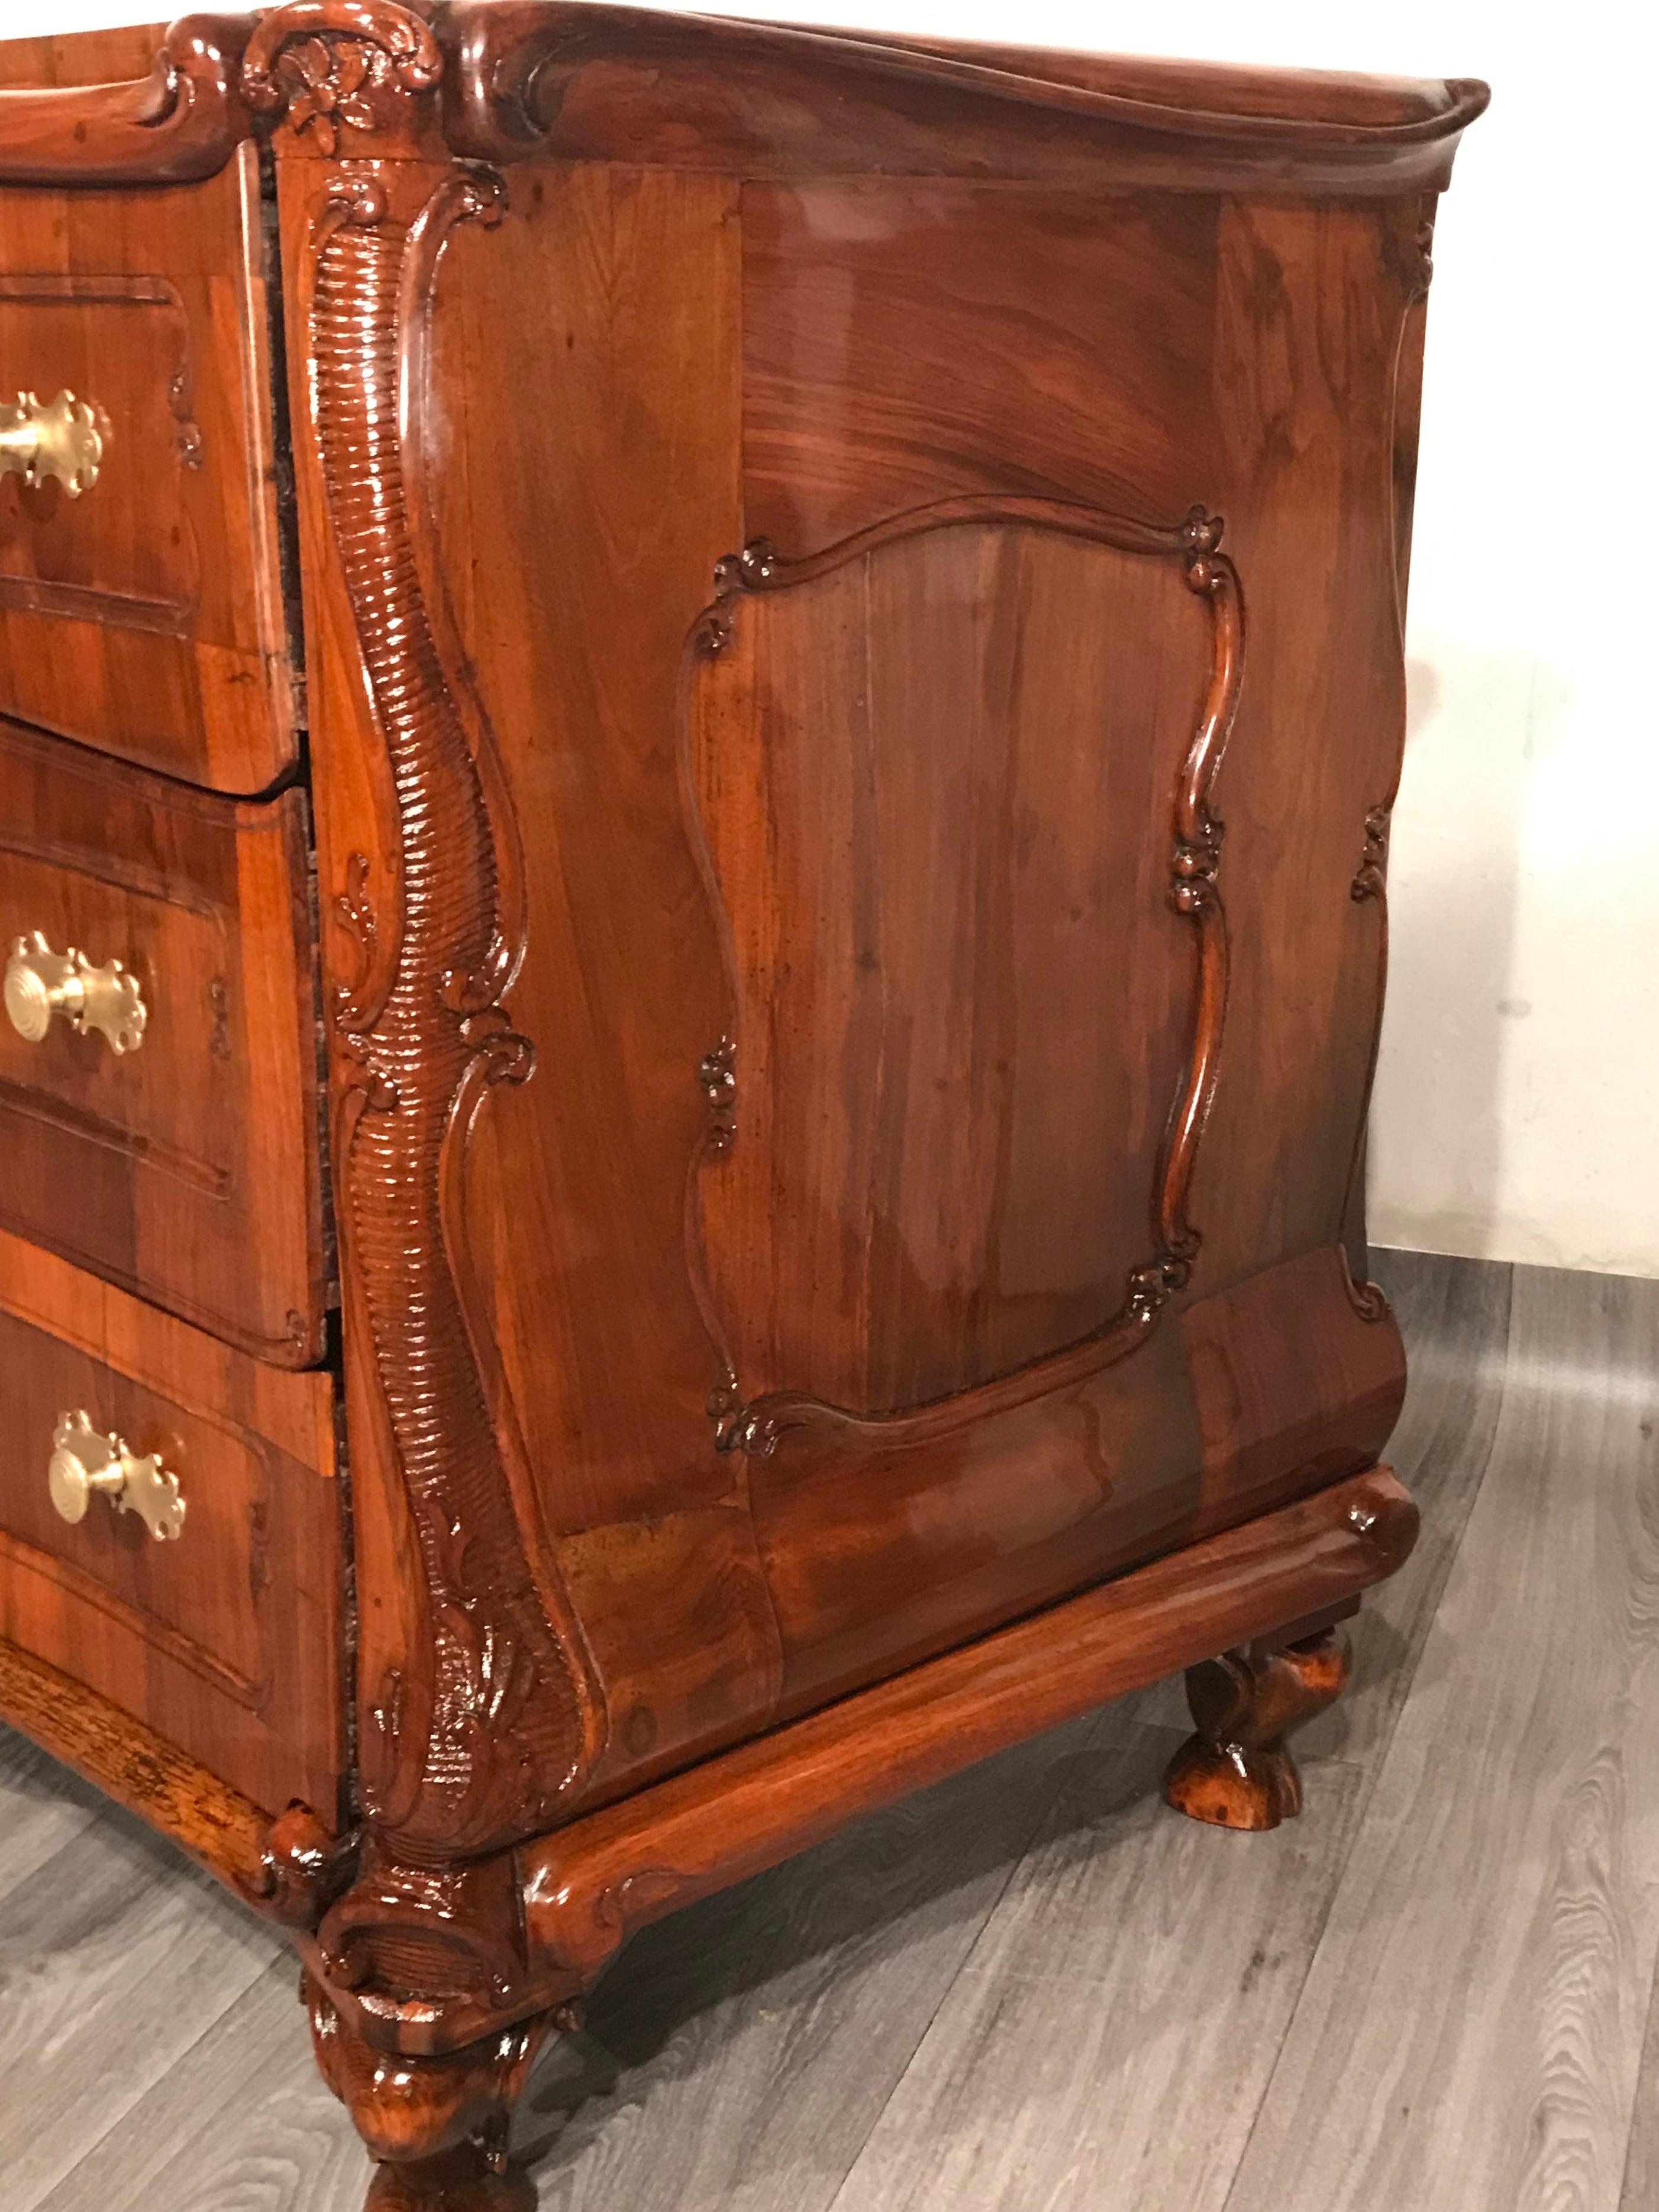 Baroque Commode, Switzerland 18th Century, Walnut In Good Condition For Sale In Belmont, MA